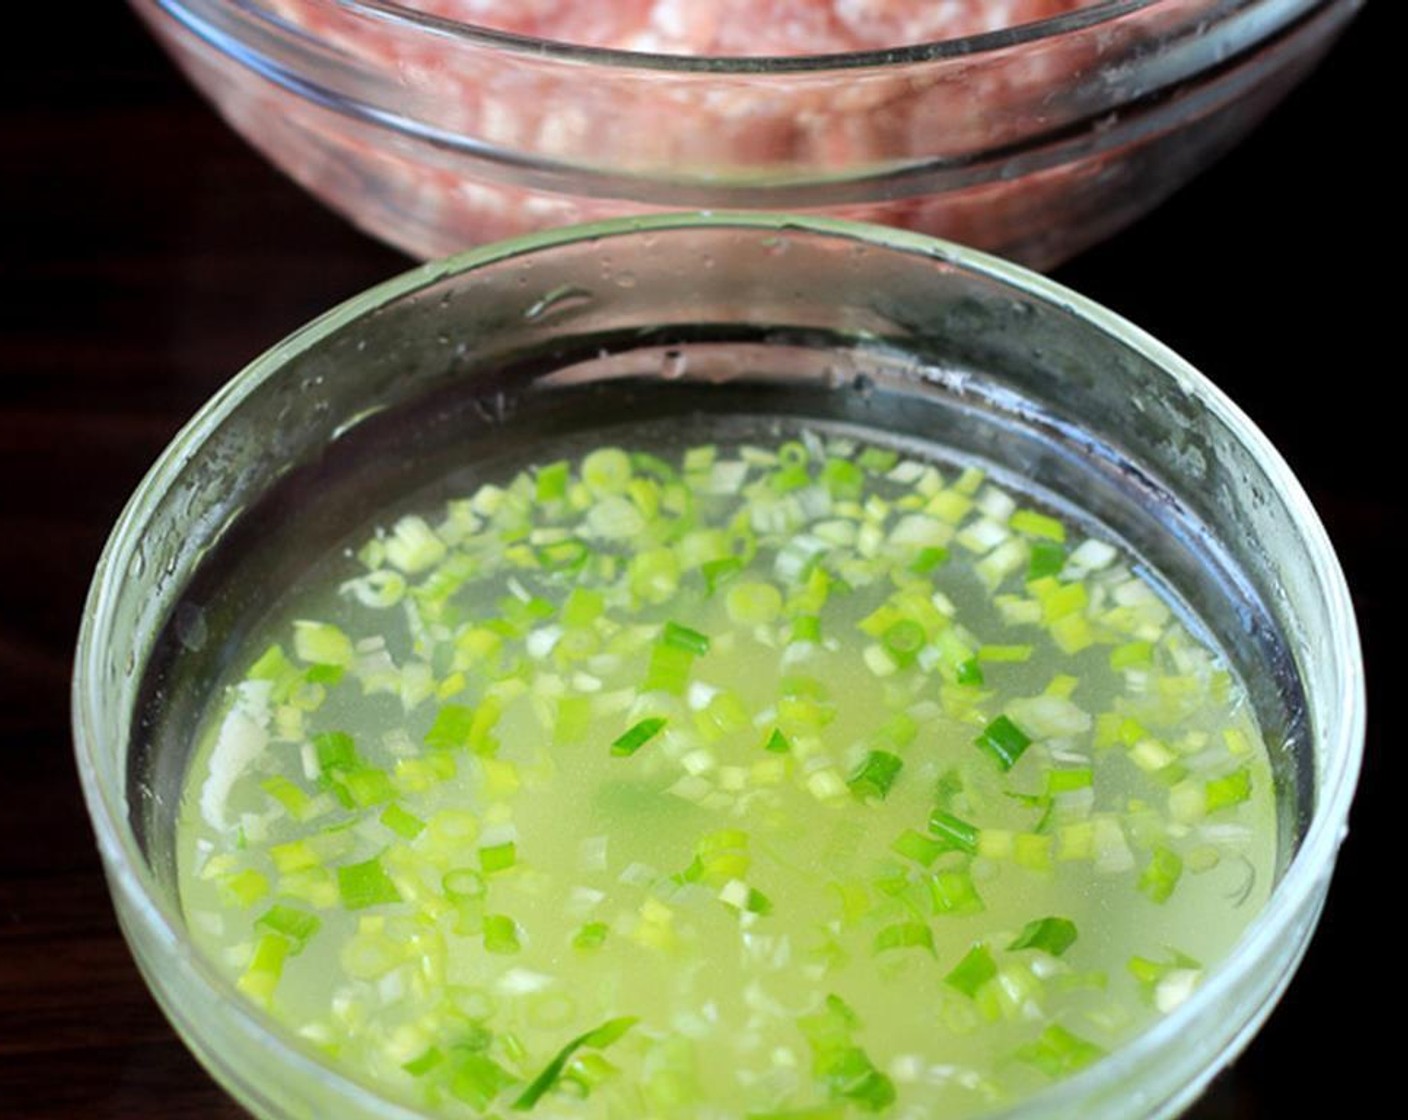 step 4 In a small bowl, soak Fresh Ginger (1 Tbsp) and Scallion (1 Tbsp) with 1/2 cup of hot water for around 10 minutes.